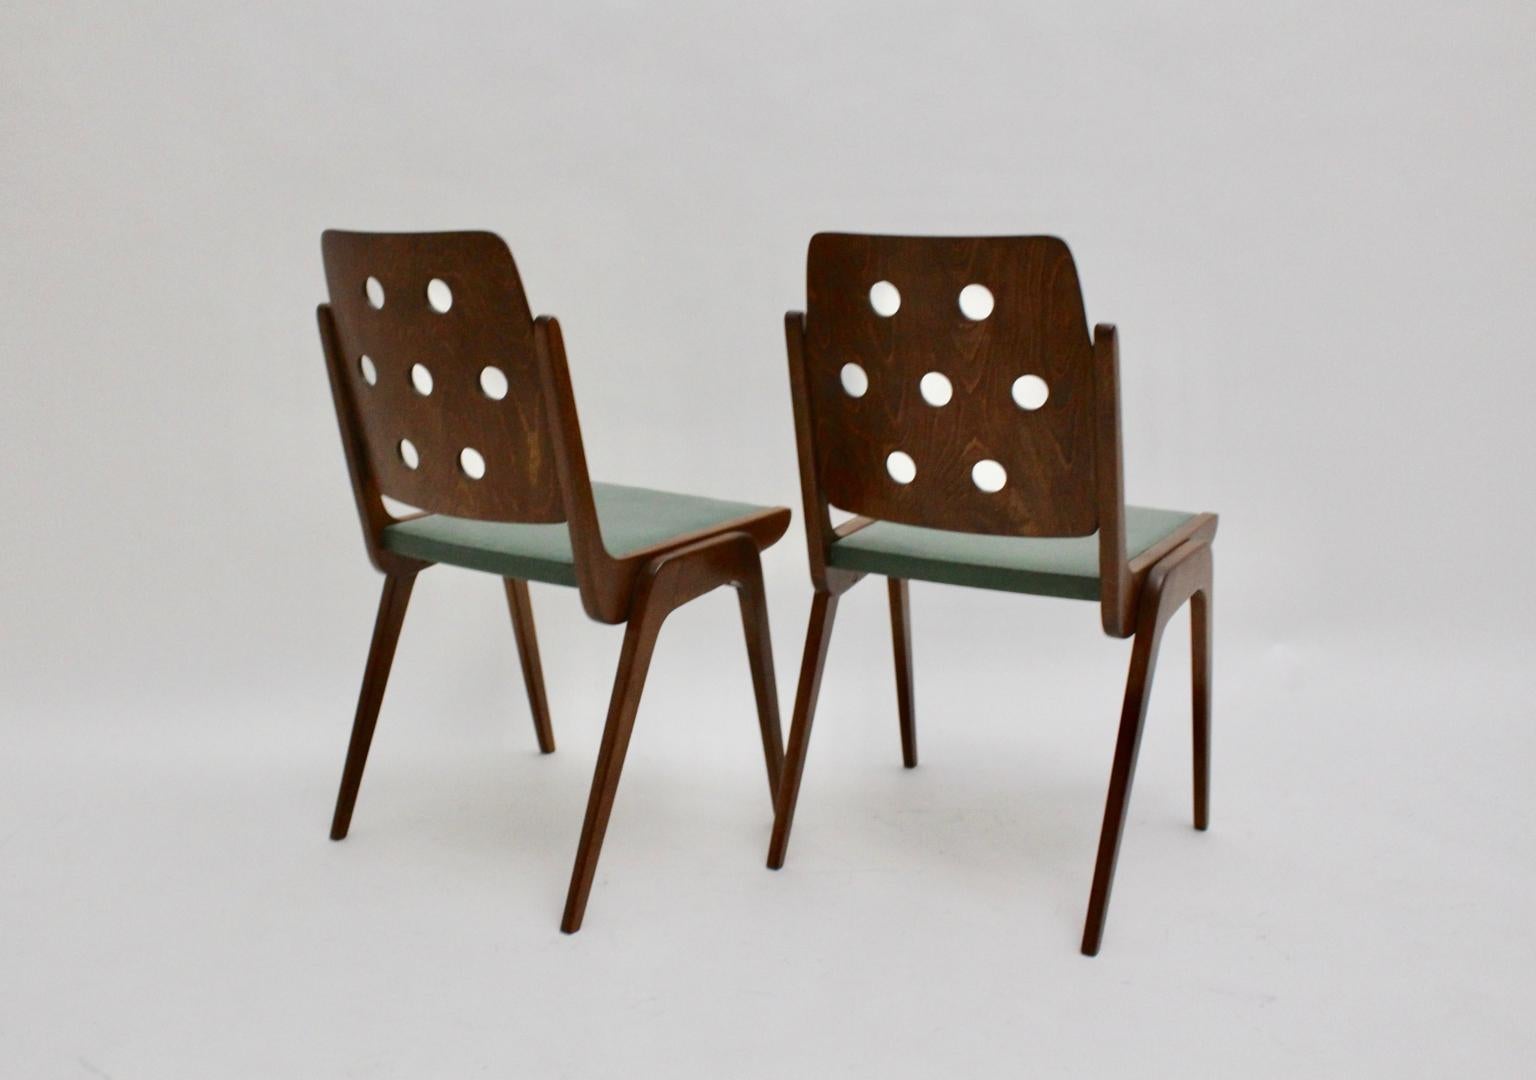 Faux Leather Mid-Century Modern Vintage Brown and Green Dining Chairs by Franz Schuster 1950s